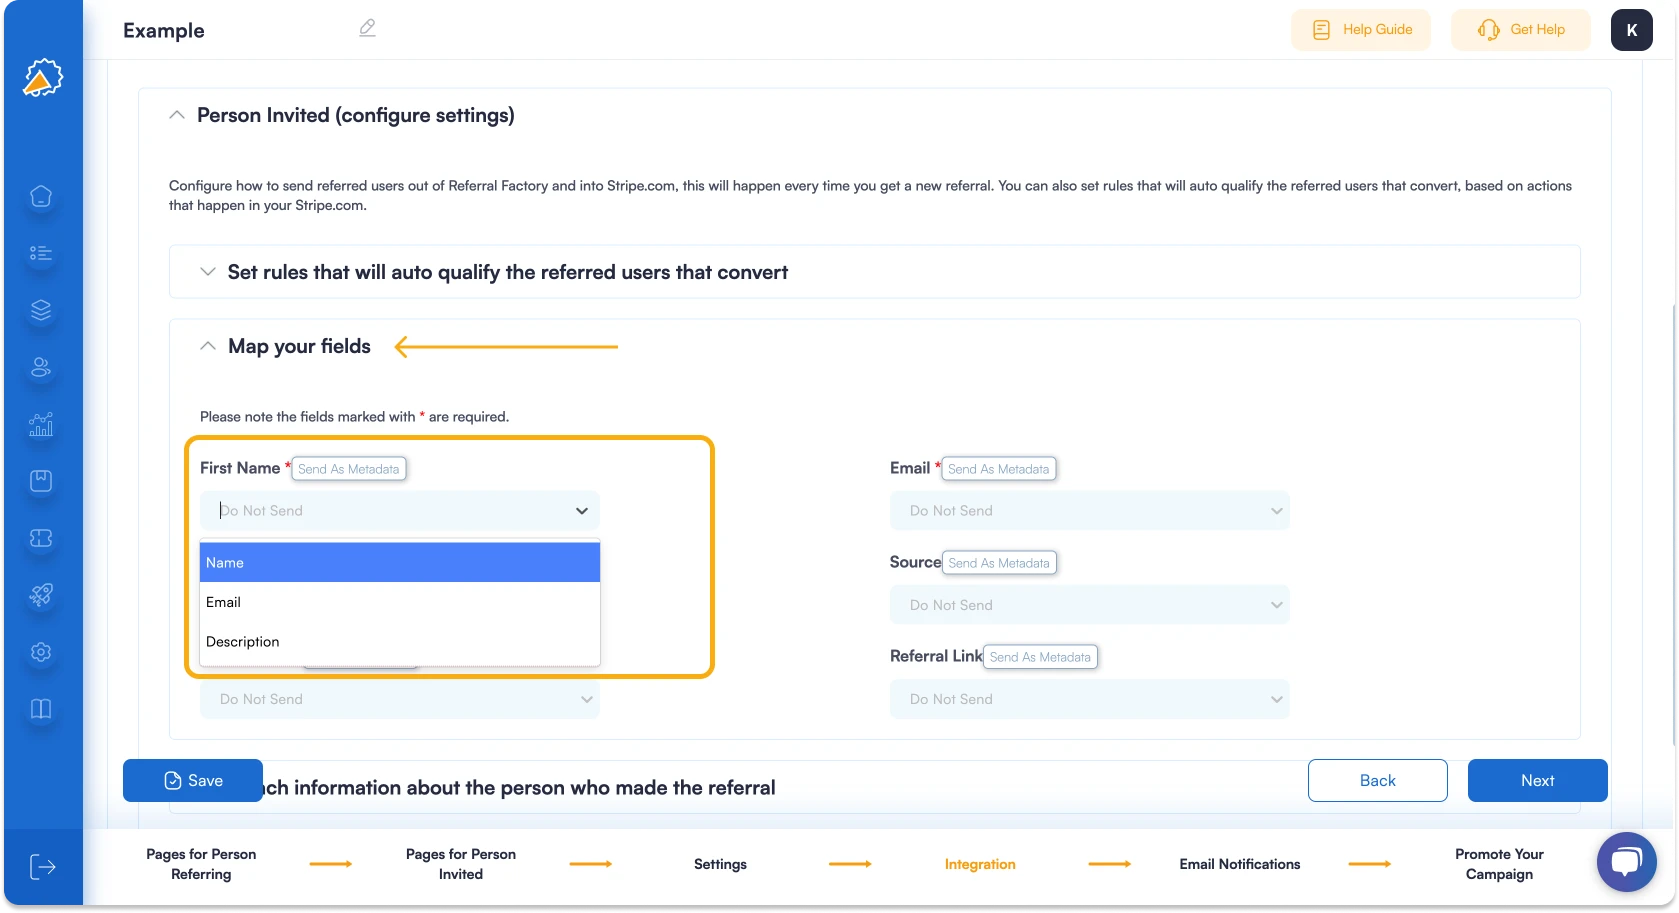 Screenshot showing that you can Map your fields. Use the drop-down options to match the relevant data between Referral Factory and Stripe.